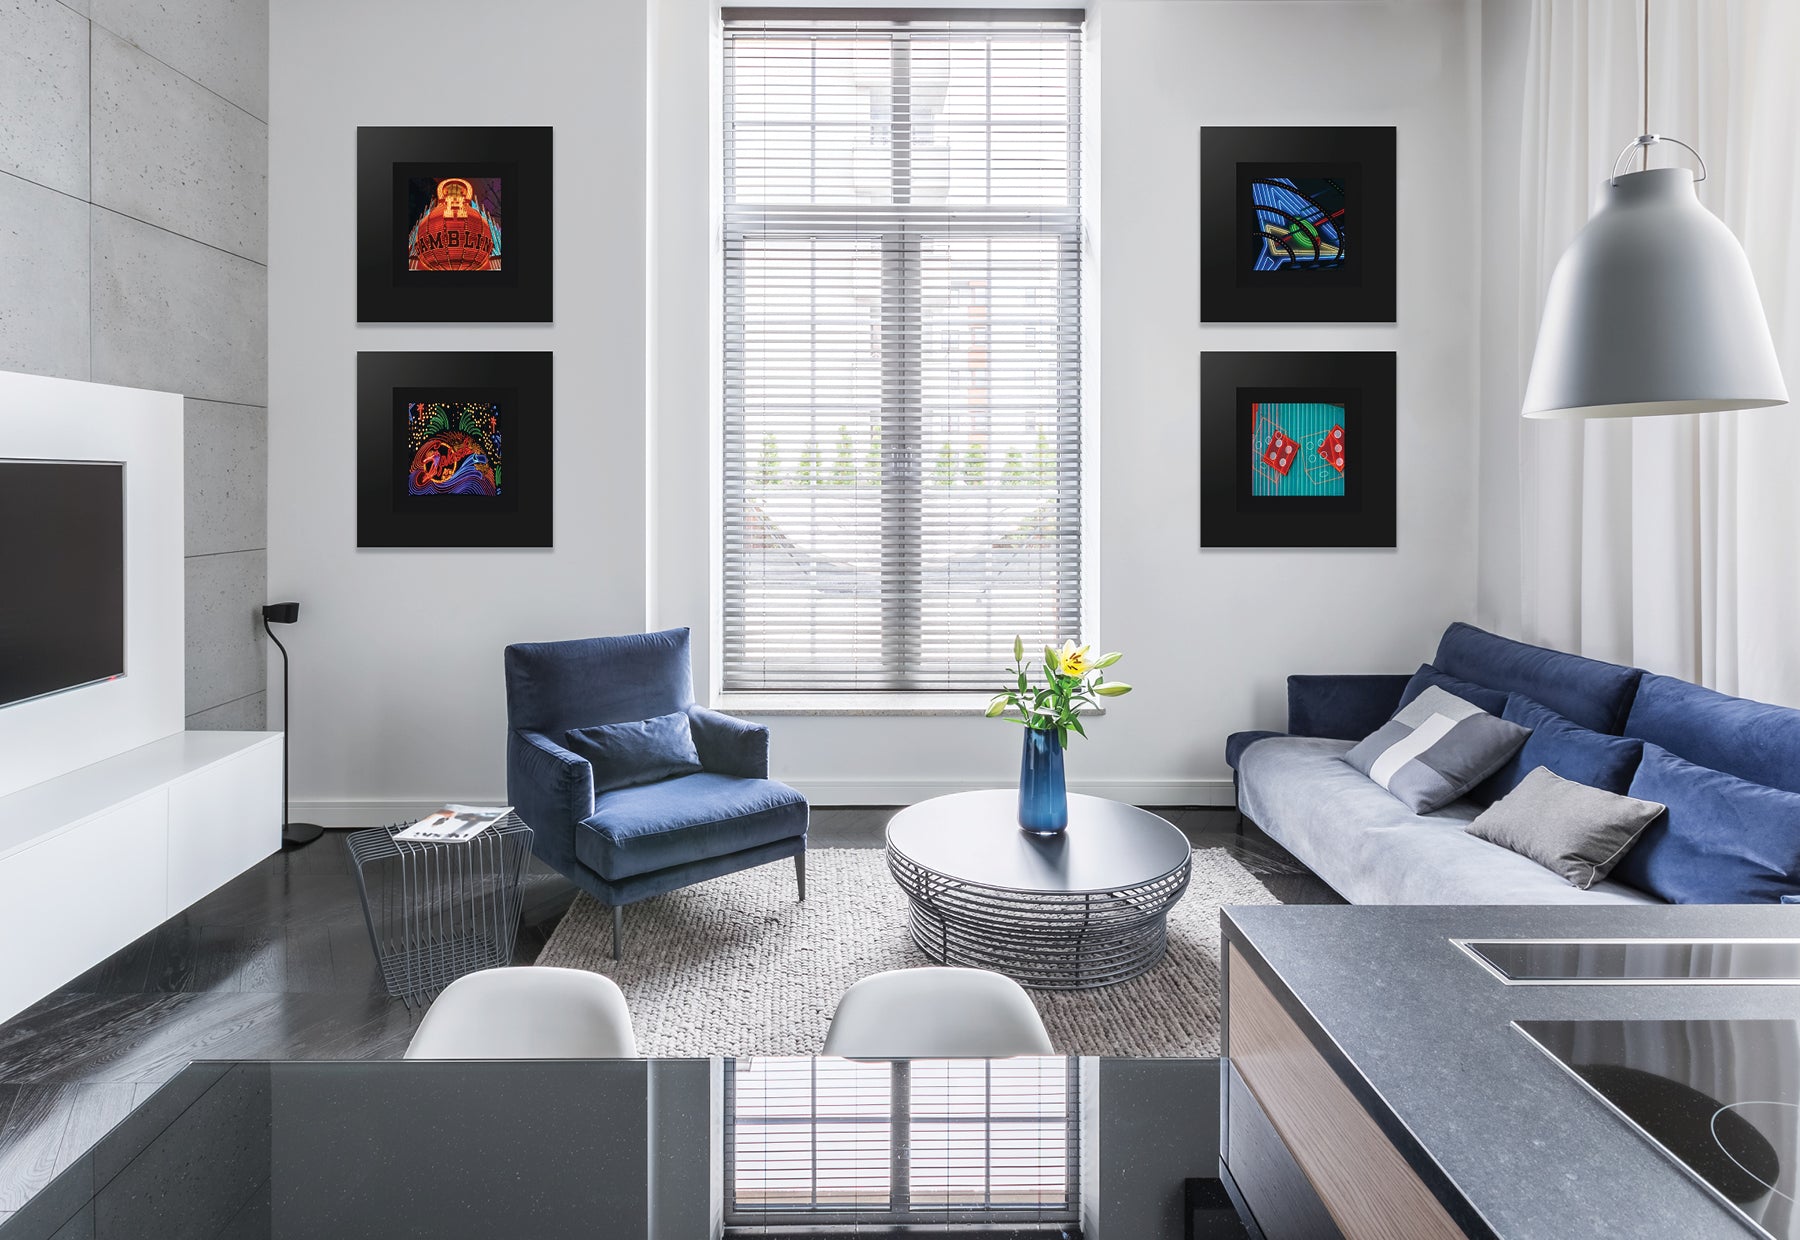 Modern home interior with blue couch and chair featuring four square photographs of Las Vegas landmarks by Peter Lik in matte black frames and black liners